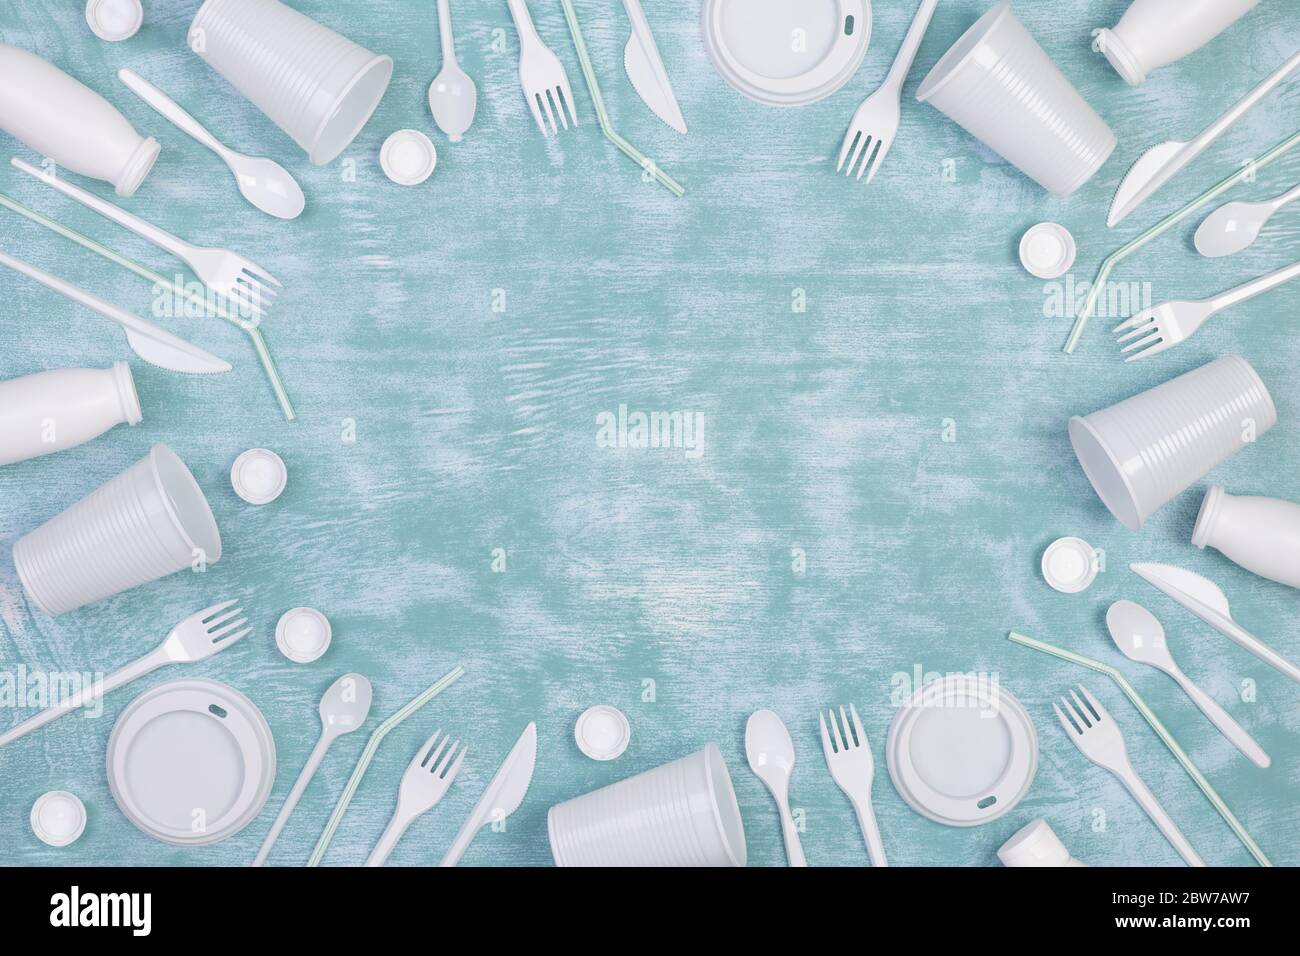 https://c8.alamy.com/comp/2BW7AW7/disposable-white-single-use-plastic-objects-such-as-bottles-cups-forks-and-spoons-on-blue-background-2BW7AW7.jpg